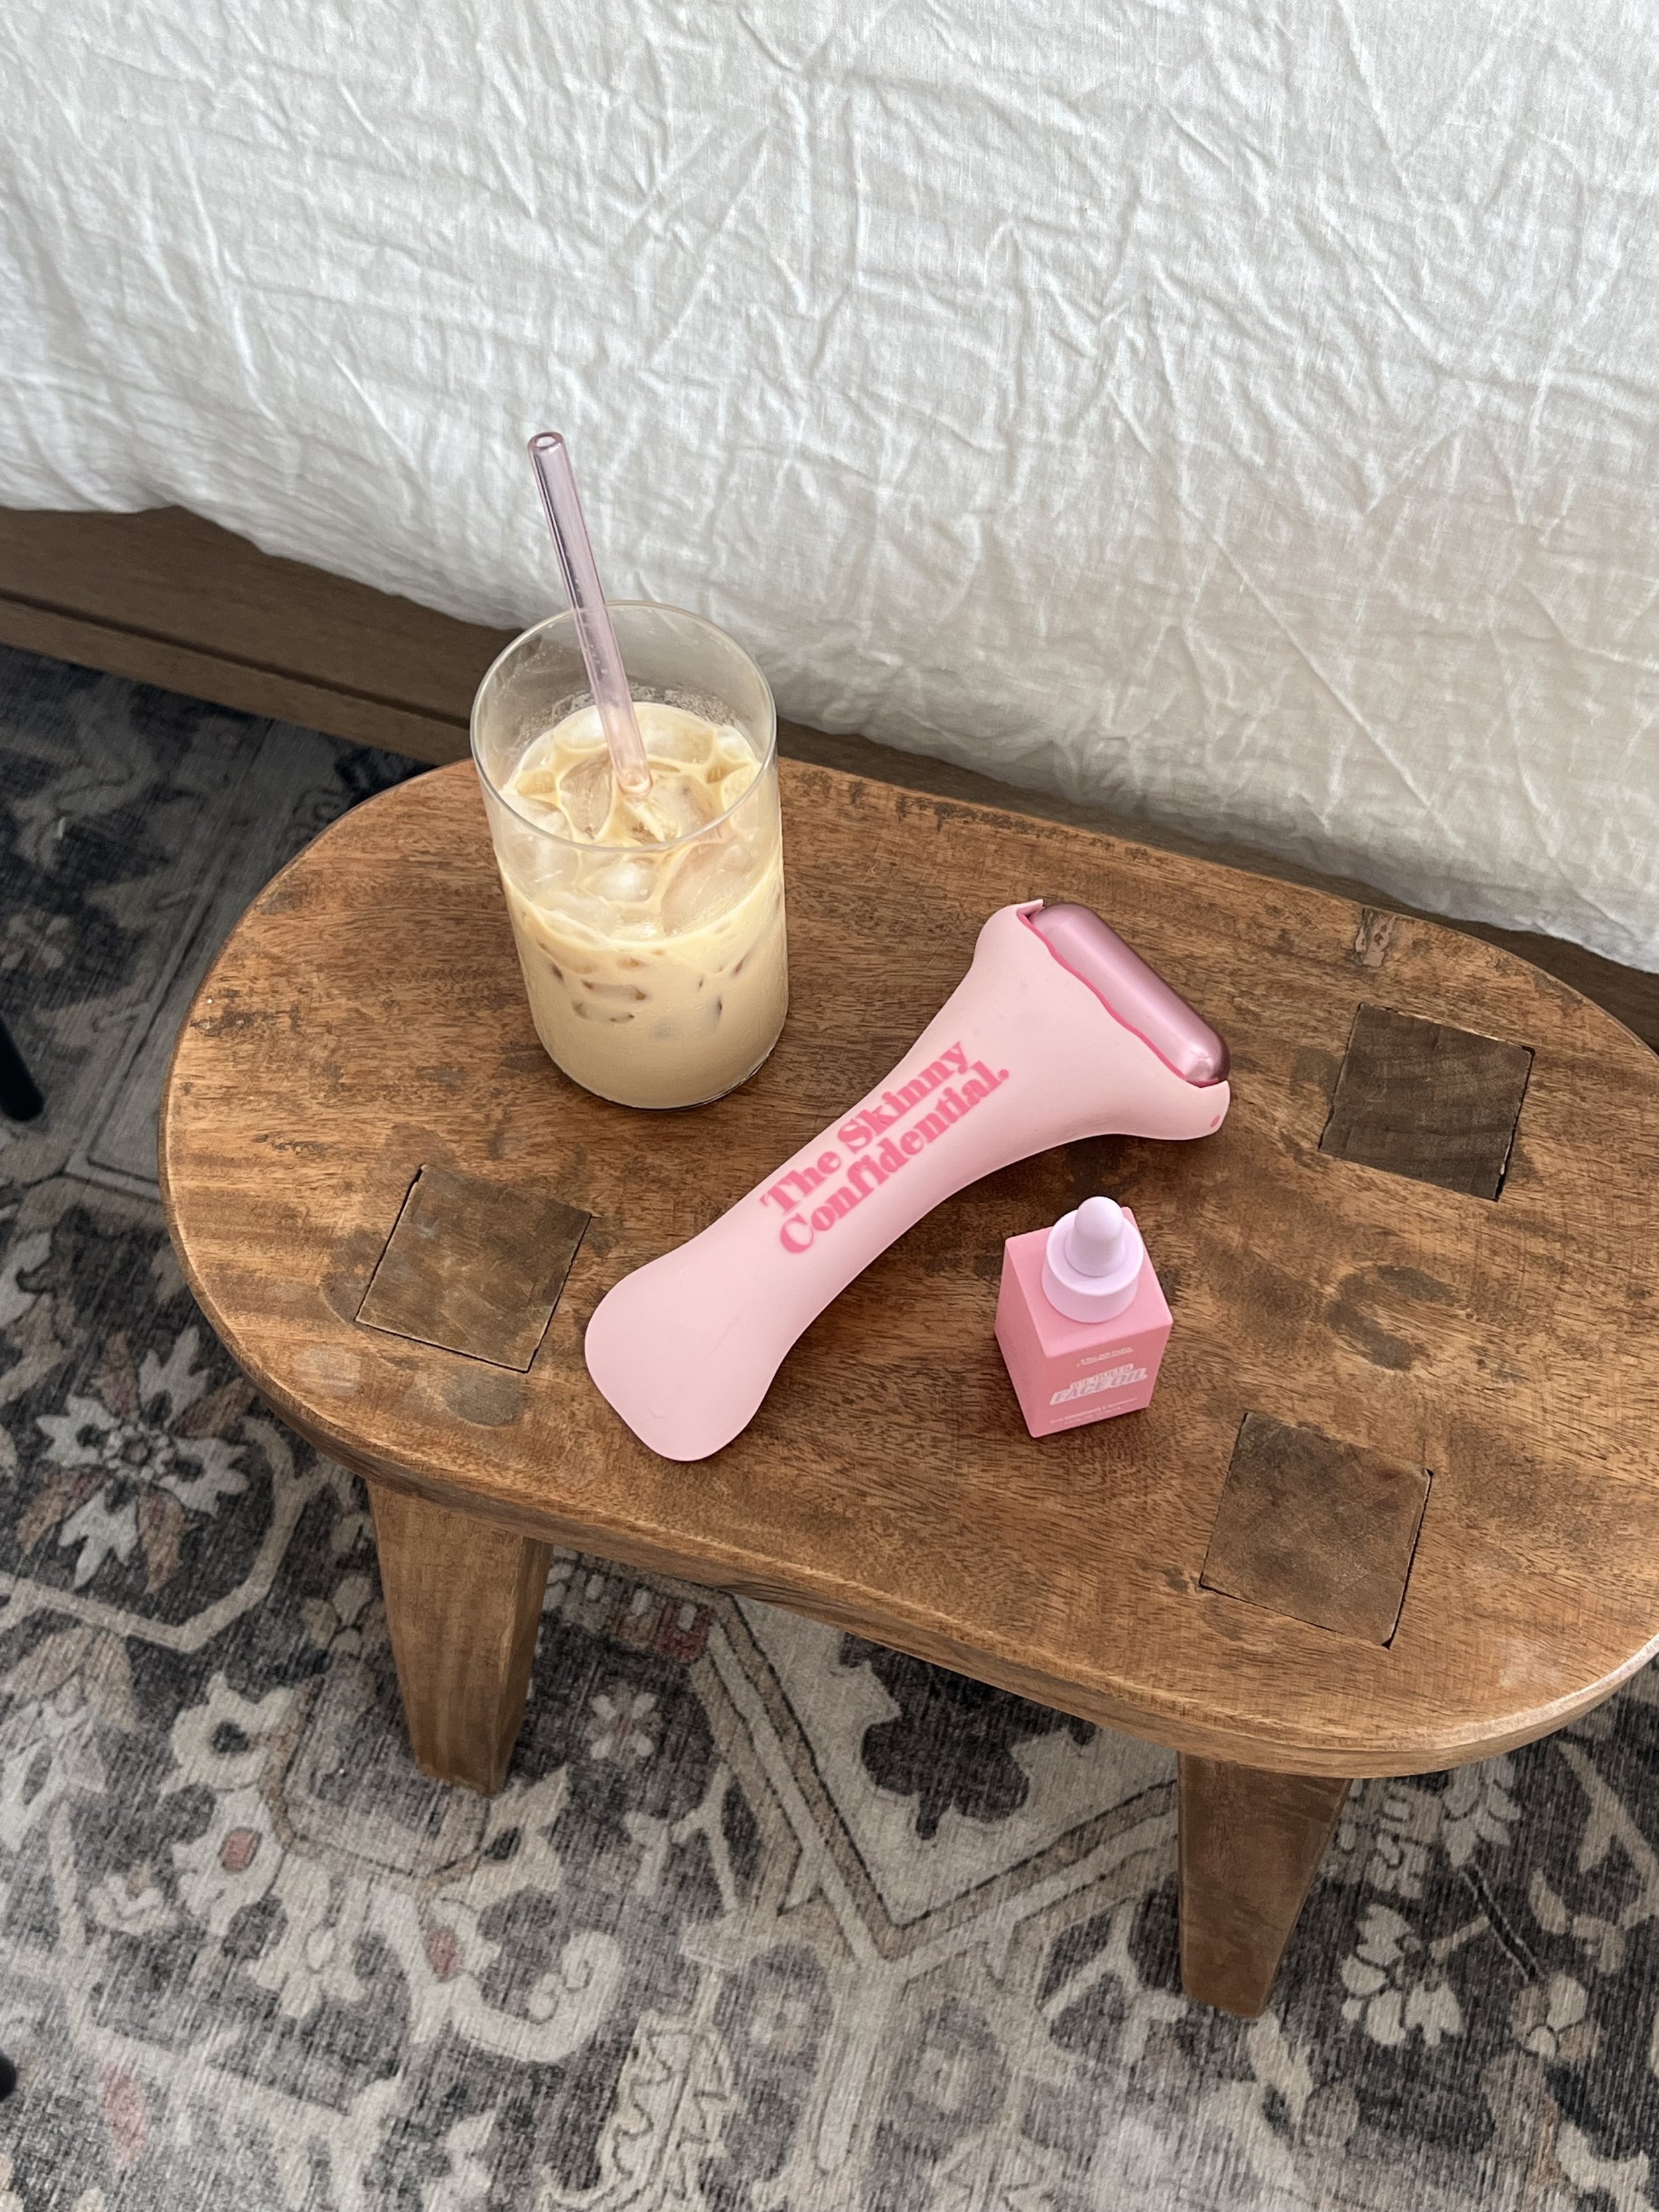 Morning Skincare Routine - bre sheppard - the skinny confidential ice roller.JPG